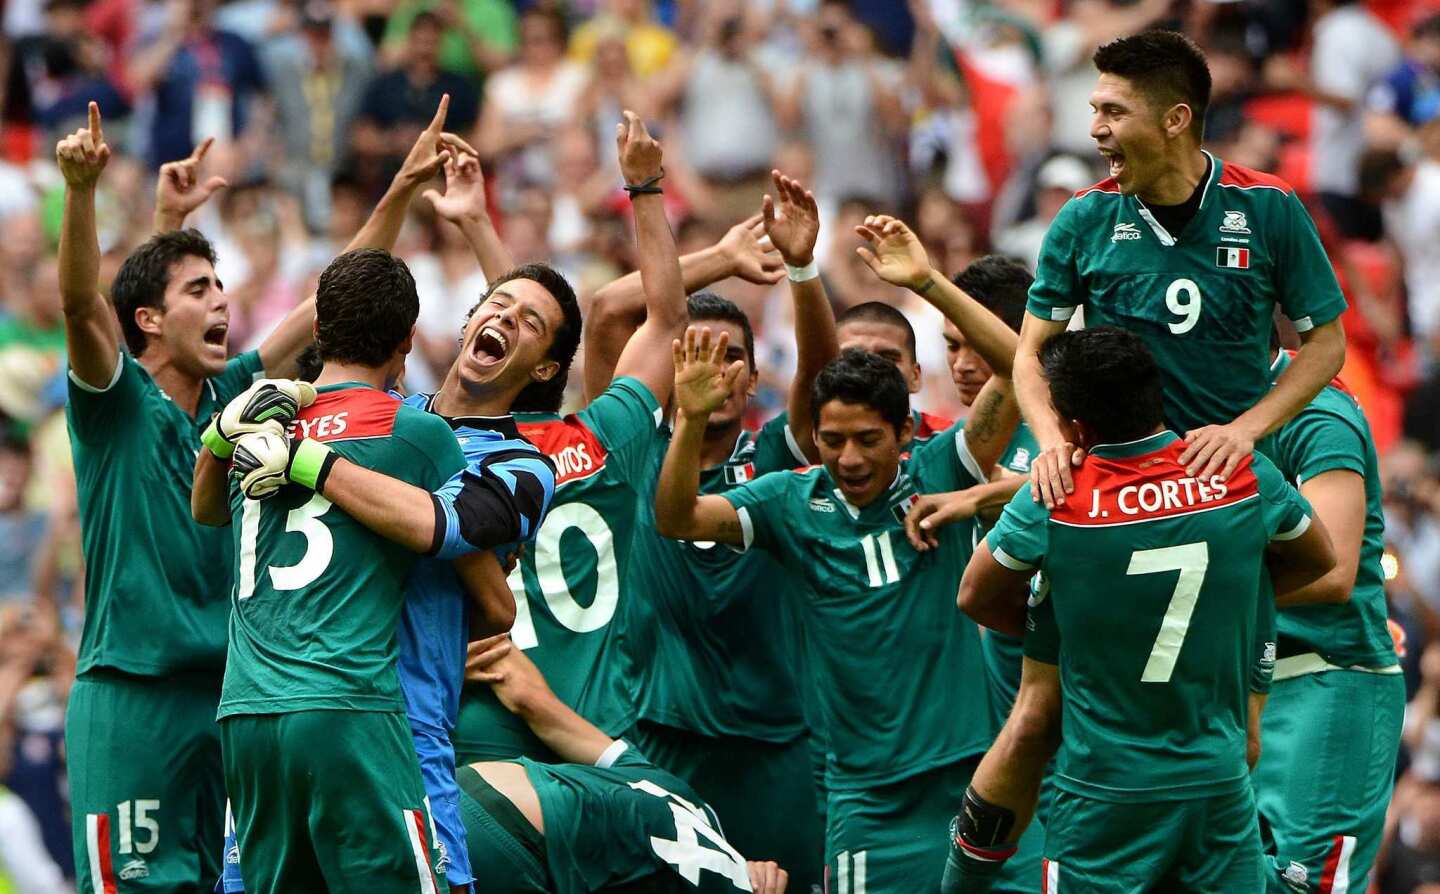 Mexico's soccer team celebrates a 2-1 Olympics final victory over Brazil. It was the first soccer gold medal for Mexico.